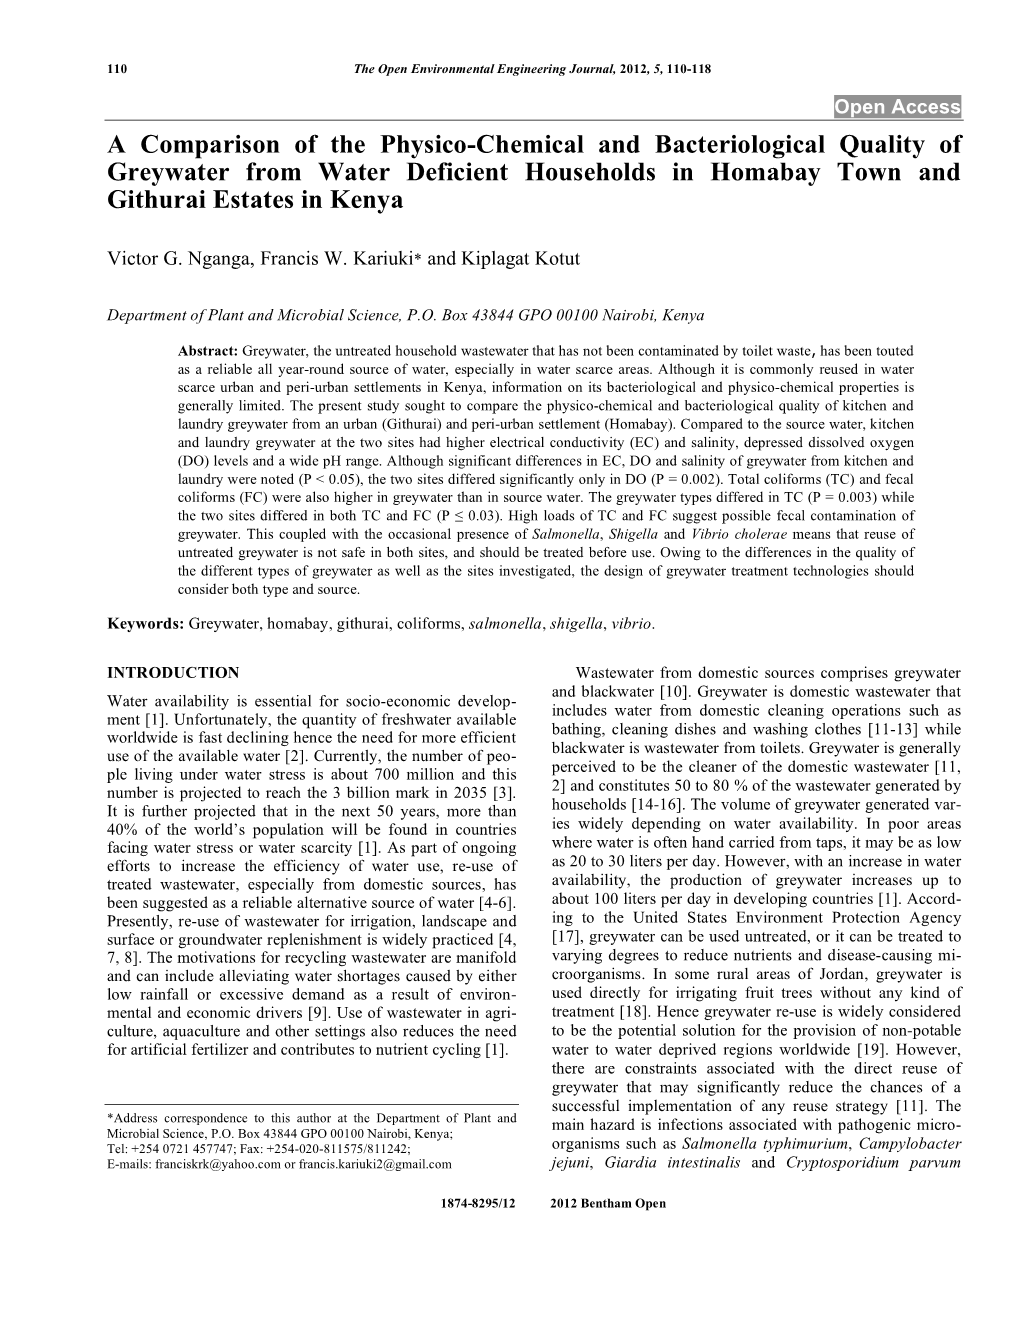 A Comparison of the Physico-Chemical and Bacteriological Quality of Greywater from Water Deficient Households in Homabay Town and Githurai Estates in Kenya